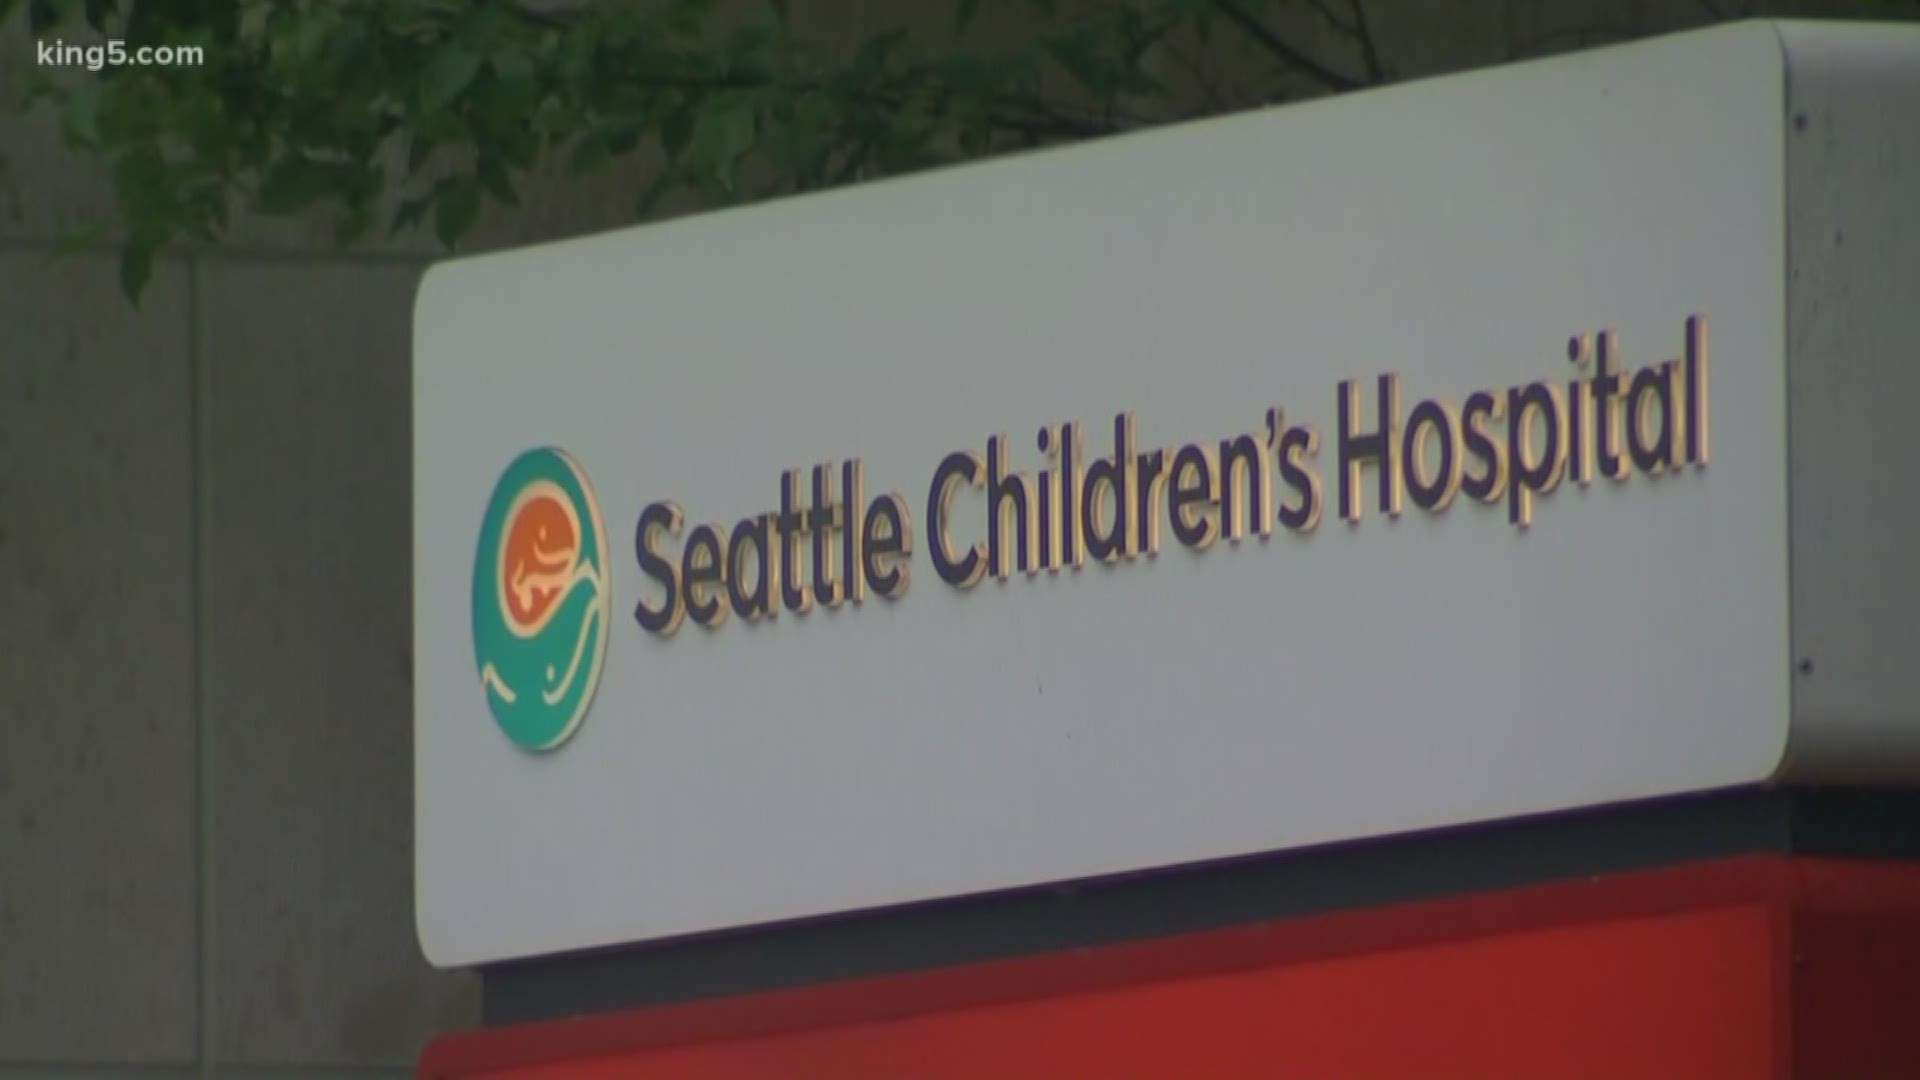 A new patient has become sick due to mold infestation.  As a precautionary measure, all main operating rooms at Seattle Children's will be closed.